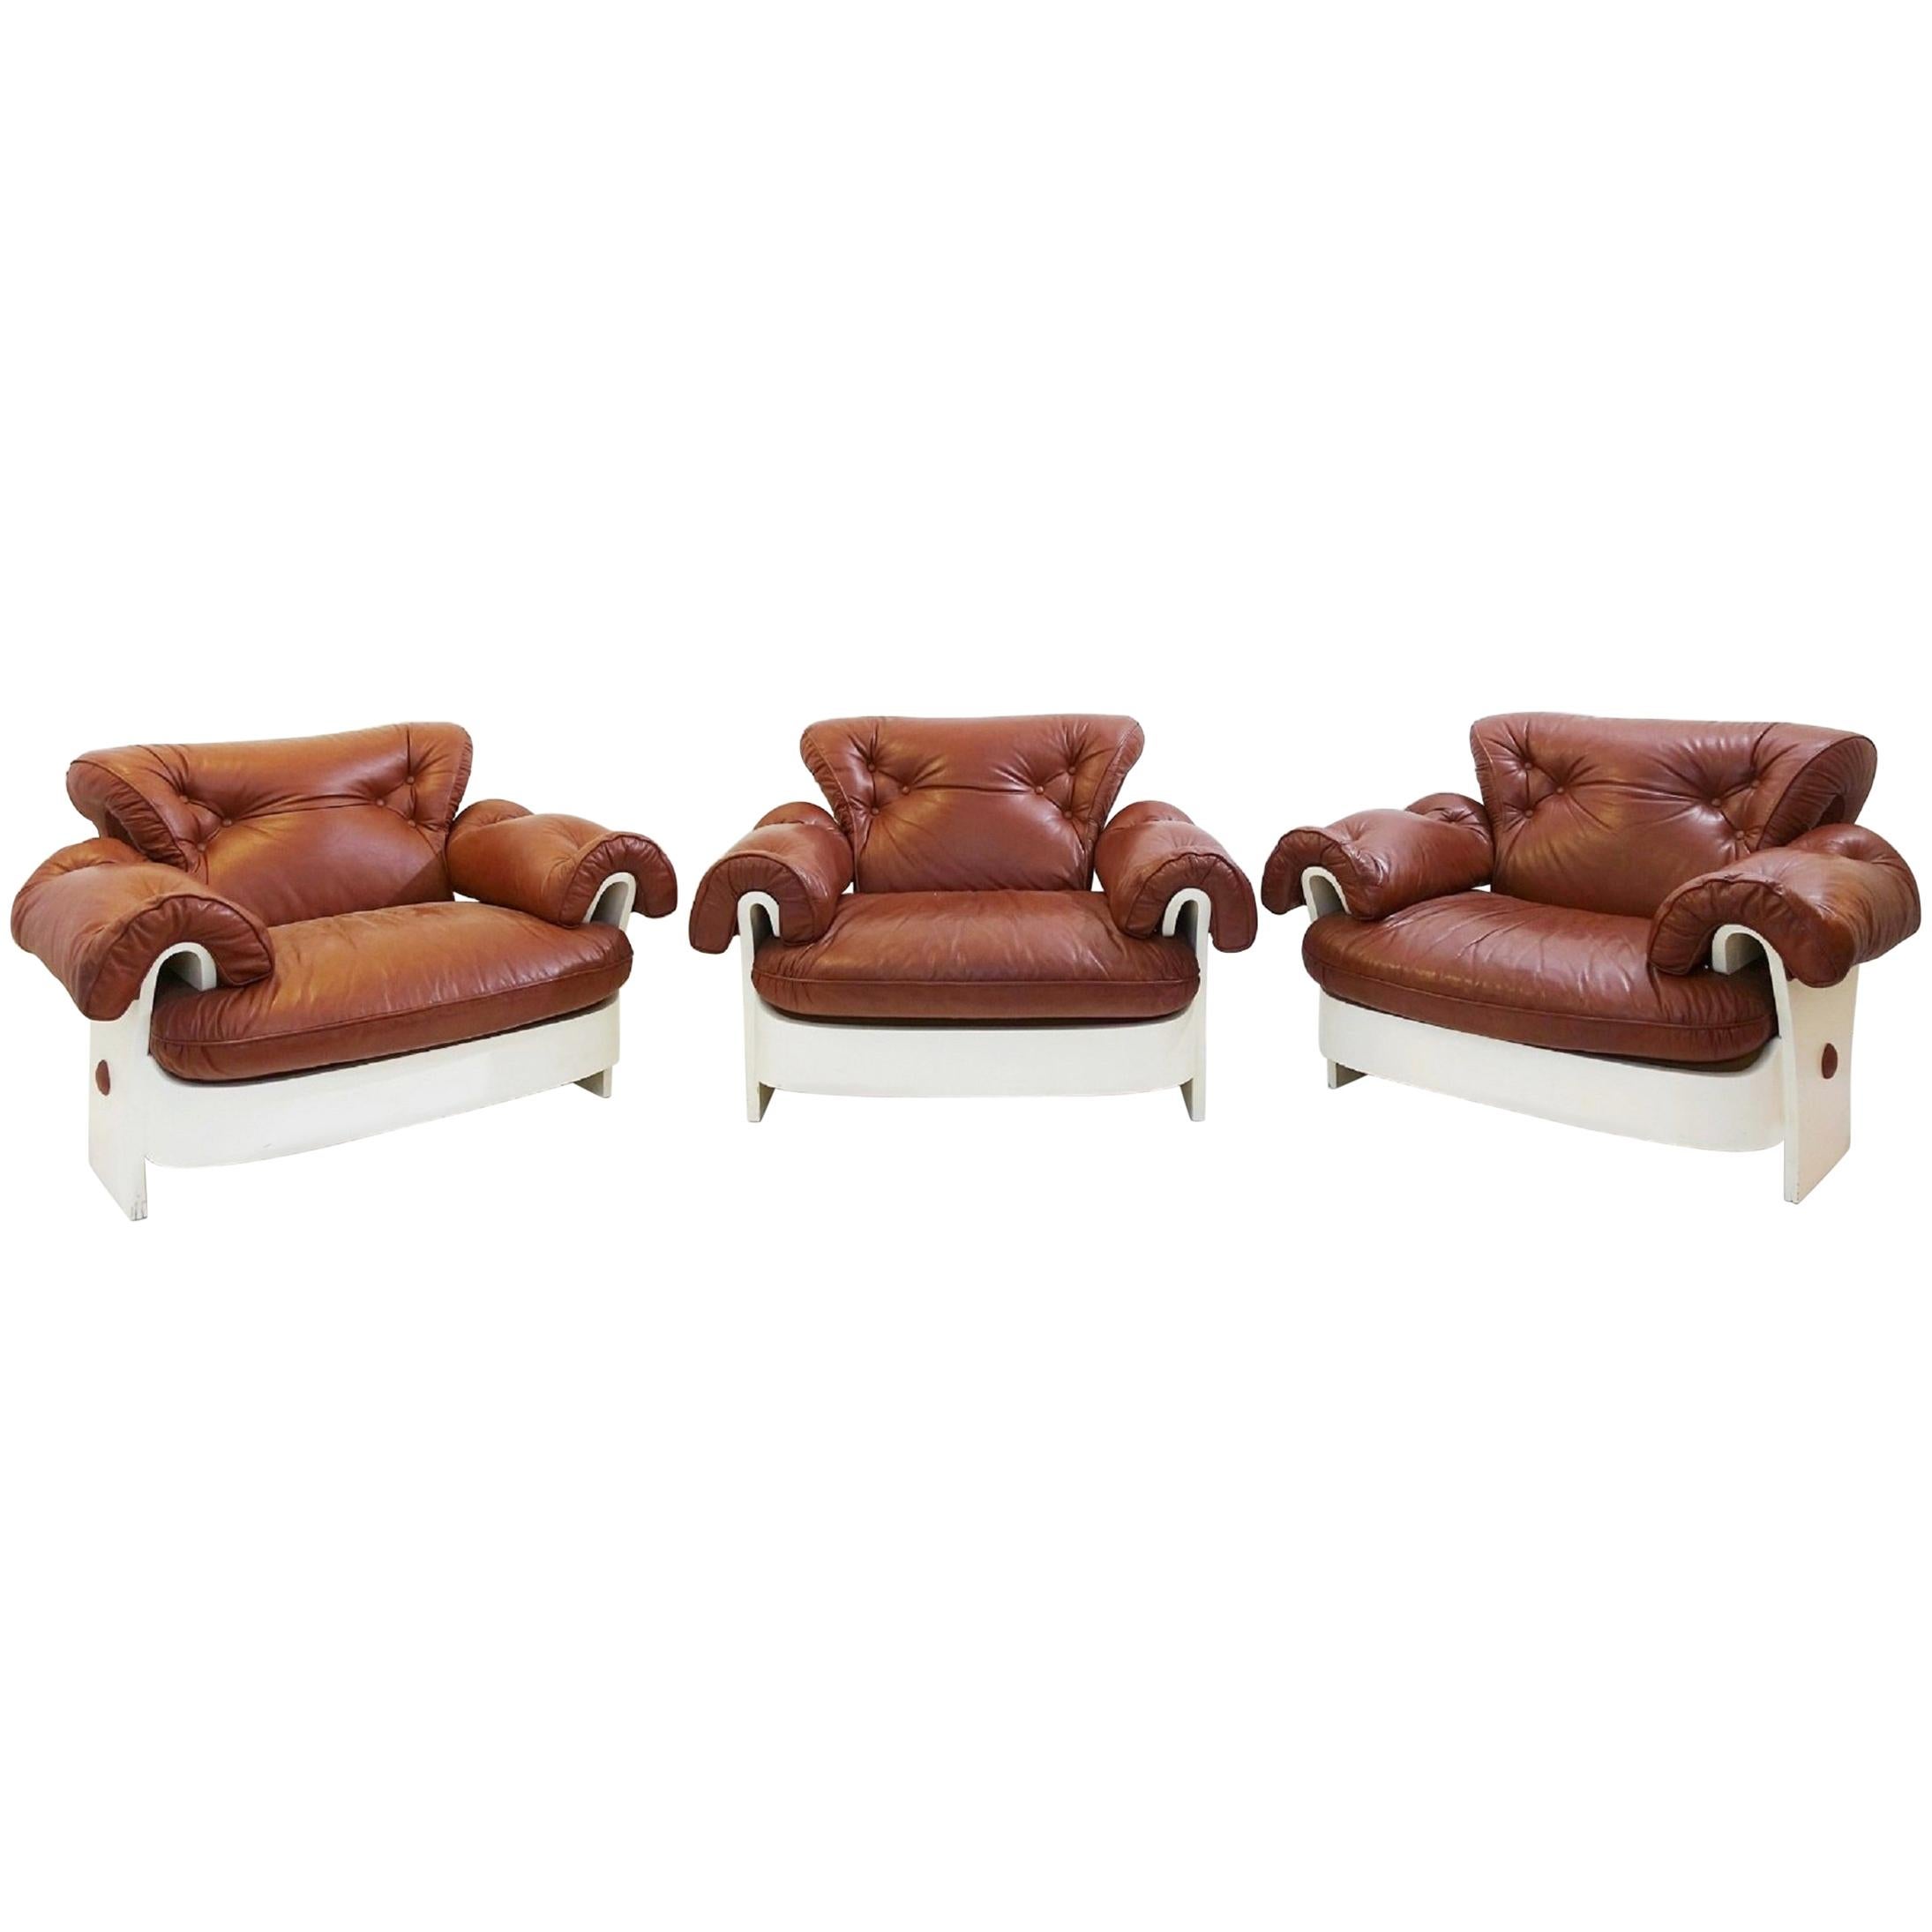 Set of 3 Armchairs in Leather and Lacquered Wood, Italy, circa 1980s